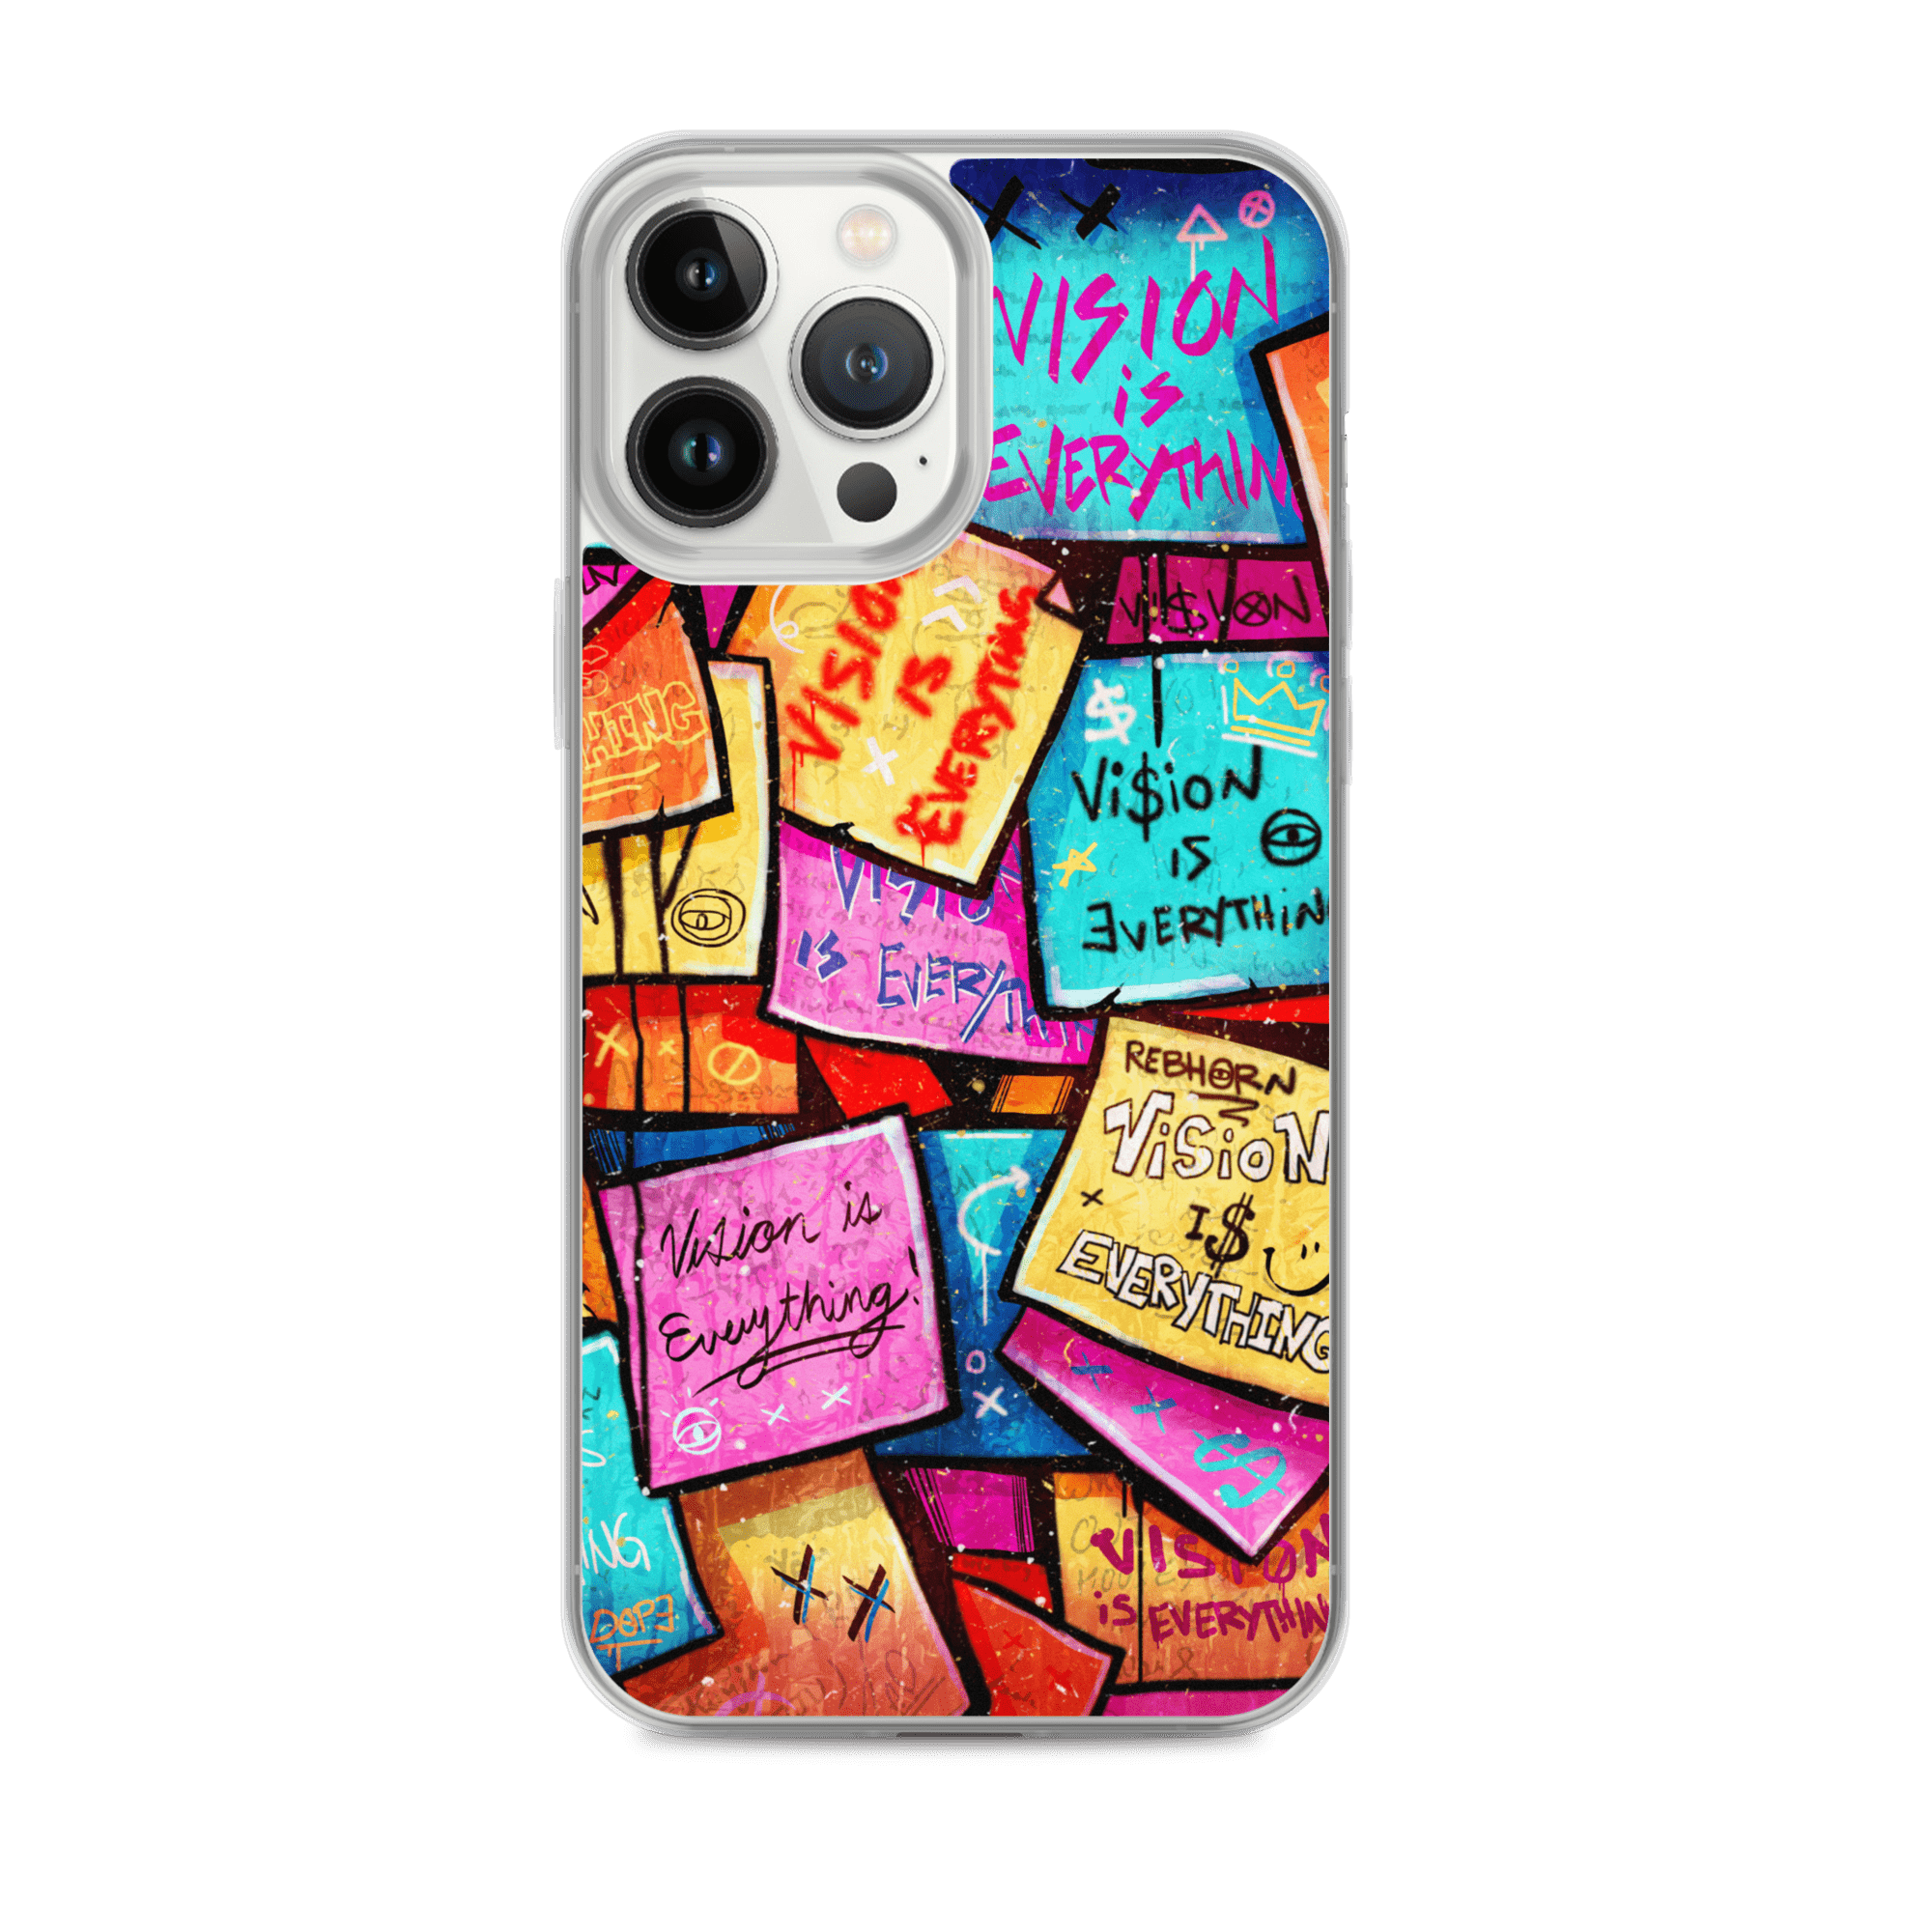 Vision Is Everything iPhone Case - REBHORN DESIGN